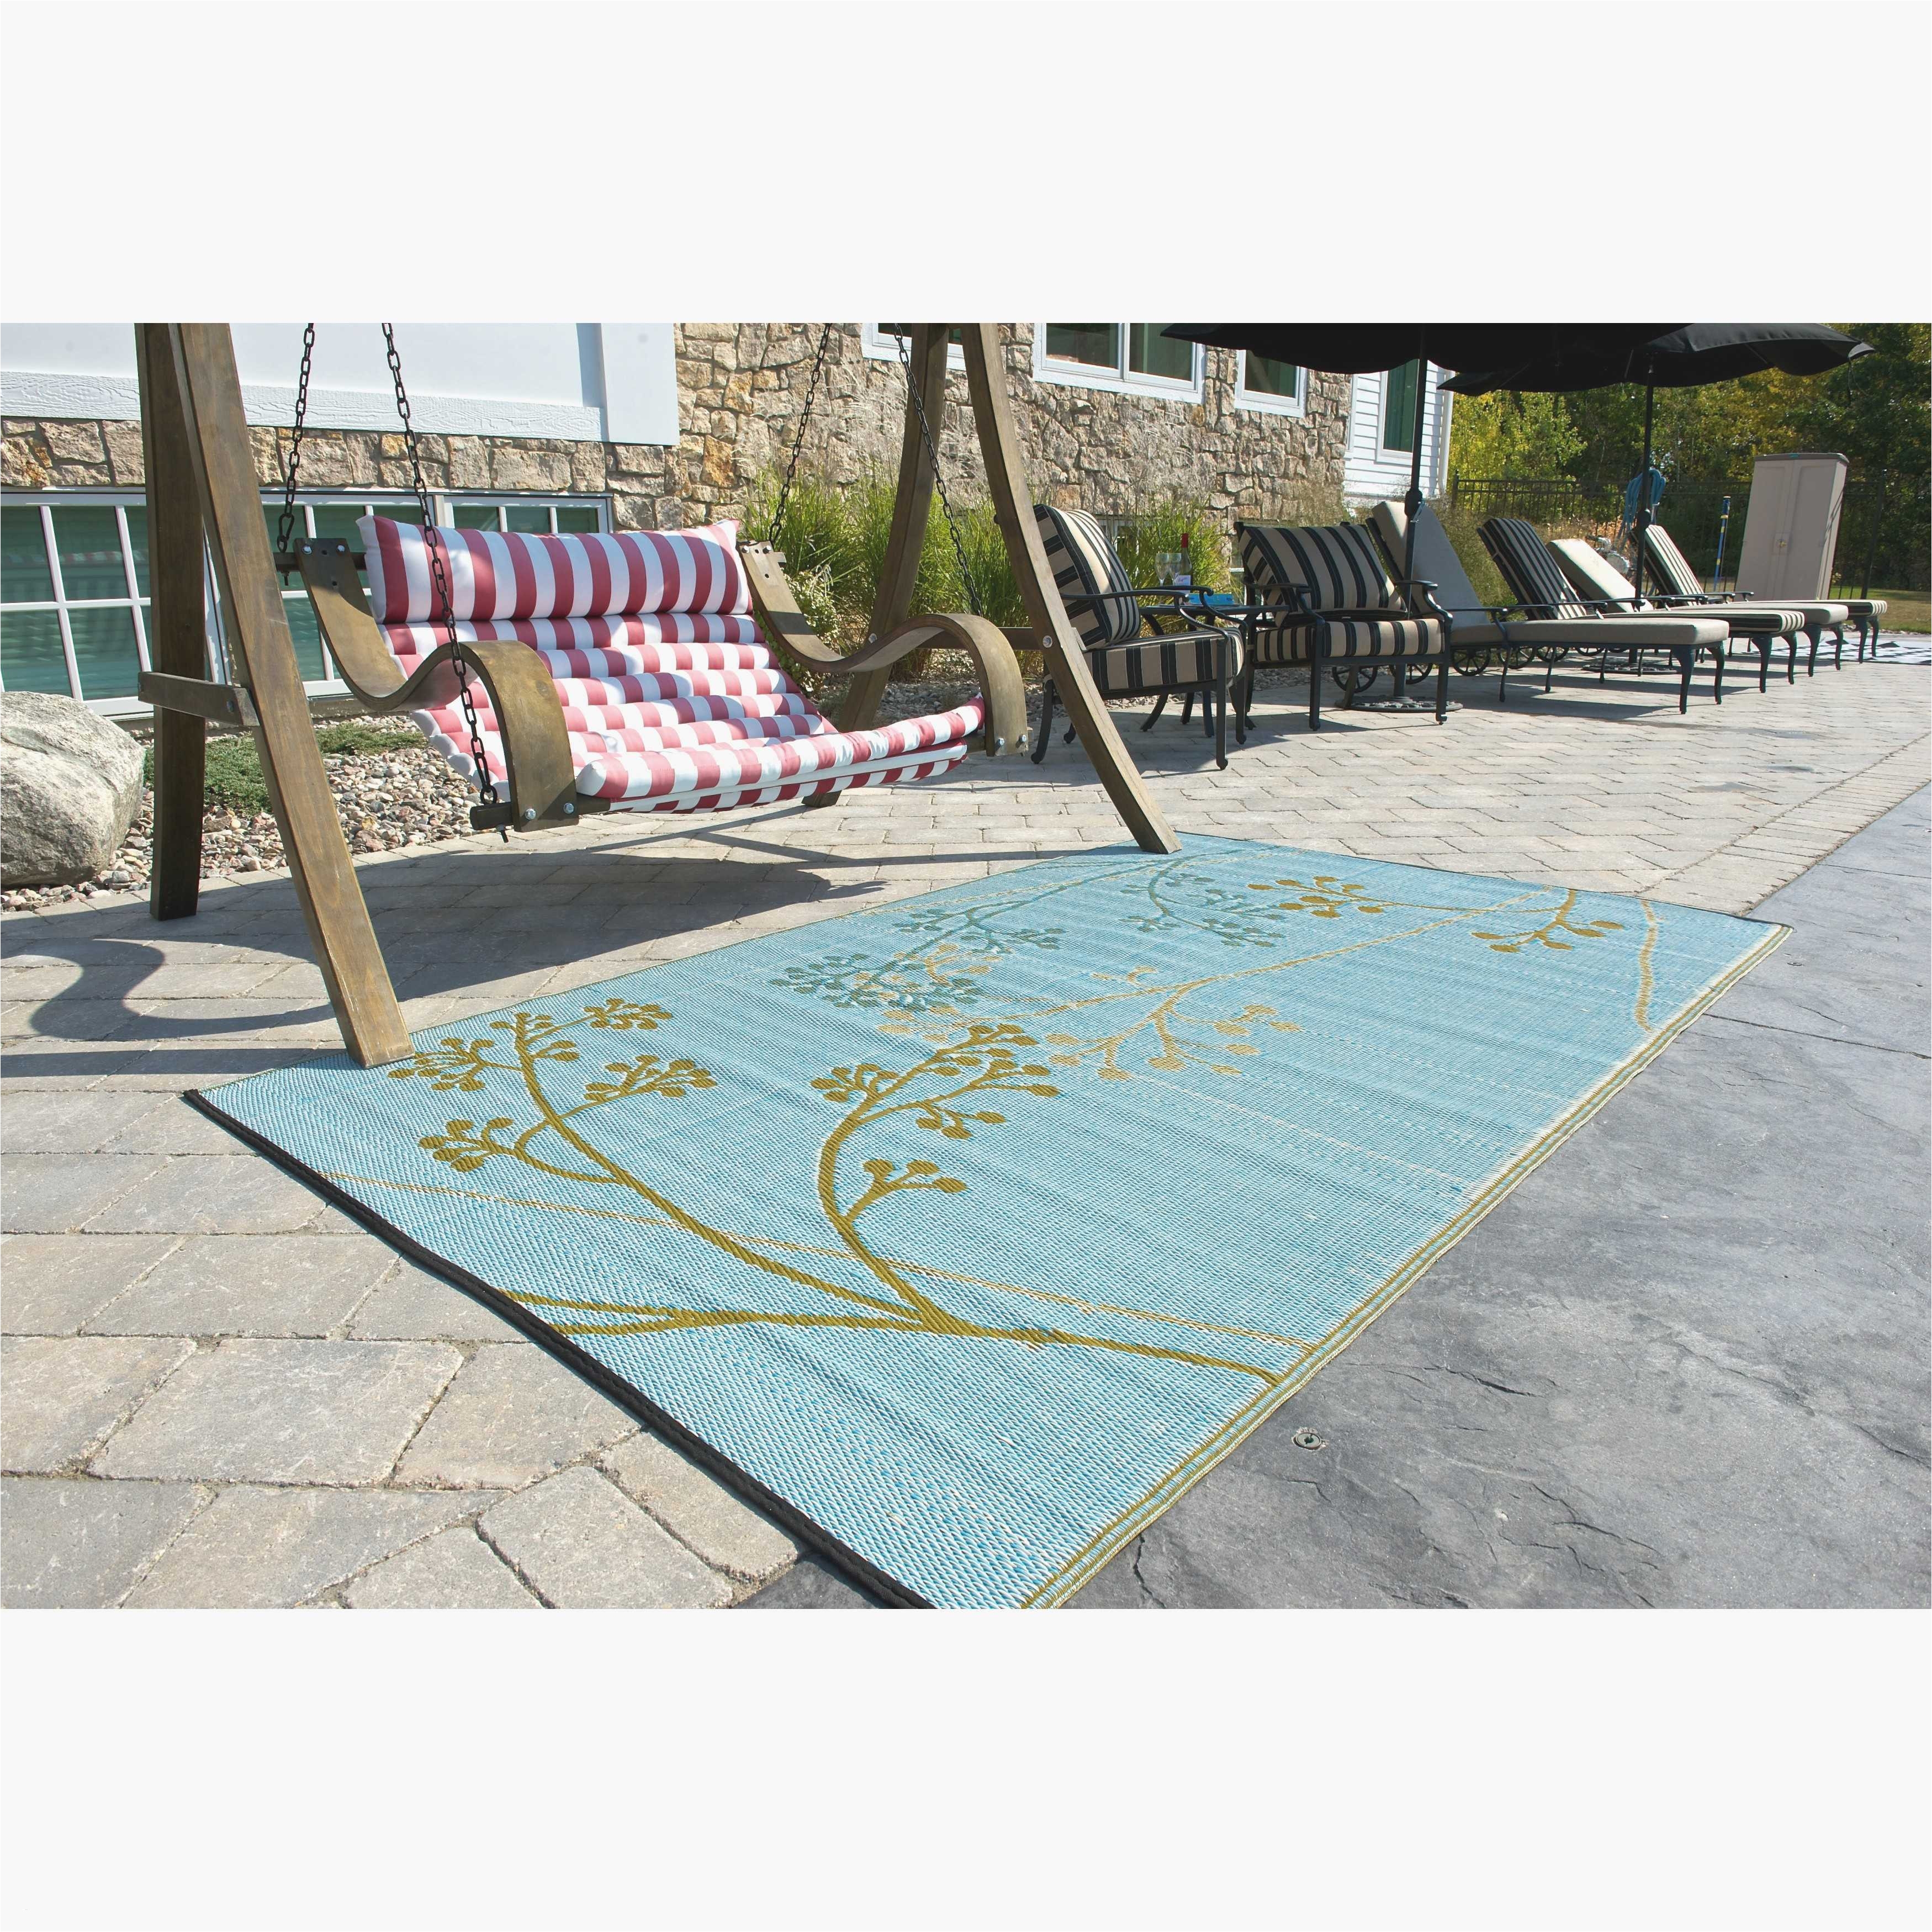 8x10 outdoor patio rugs inspirational outdoor patio rugs lovely rv patio mat beautiful outdoor rugs amazon